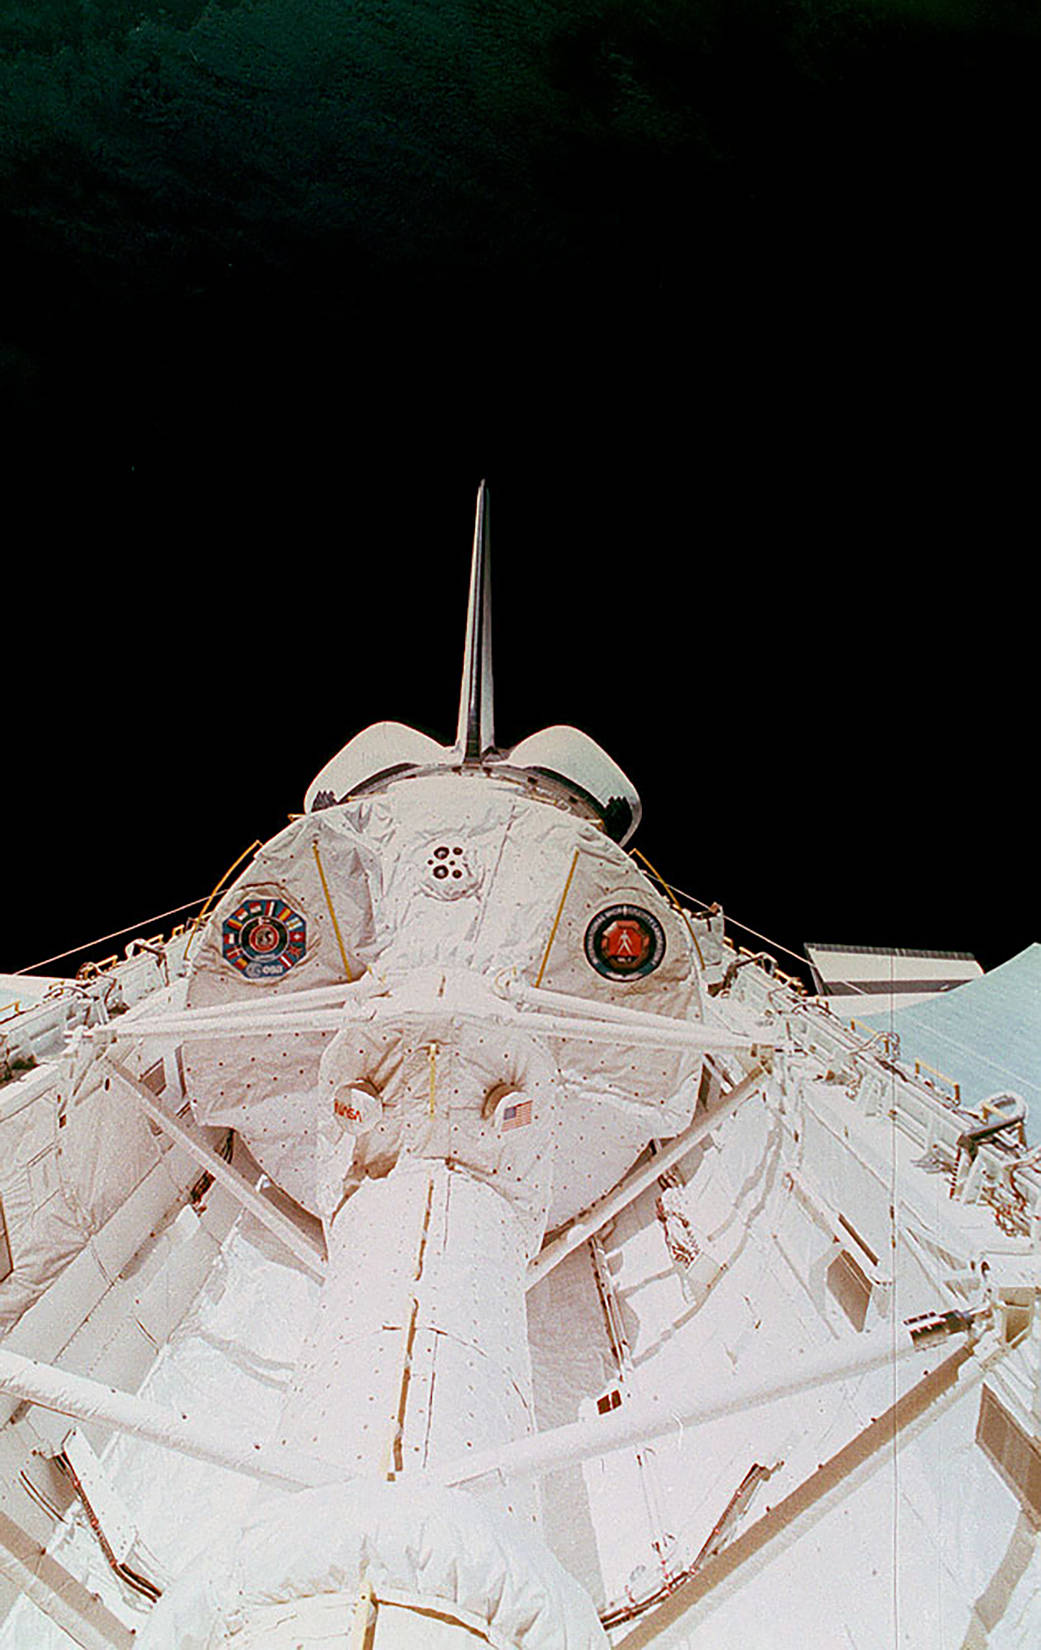 This week in 1992, the first International Microgravity Laboratory launched aboard space shuttle Discovery, mission STS-42.